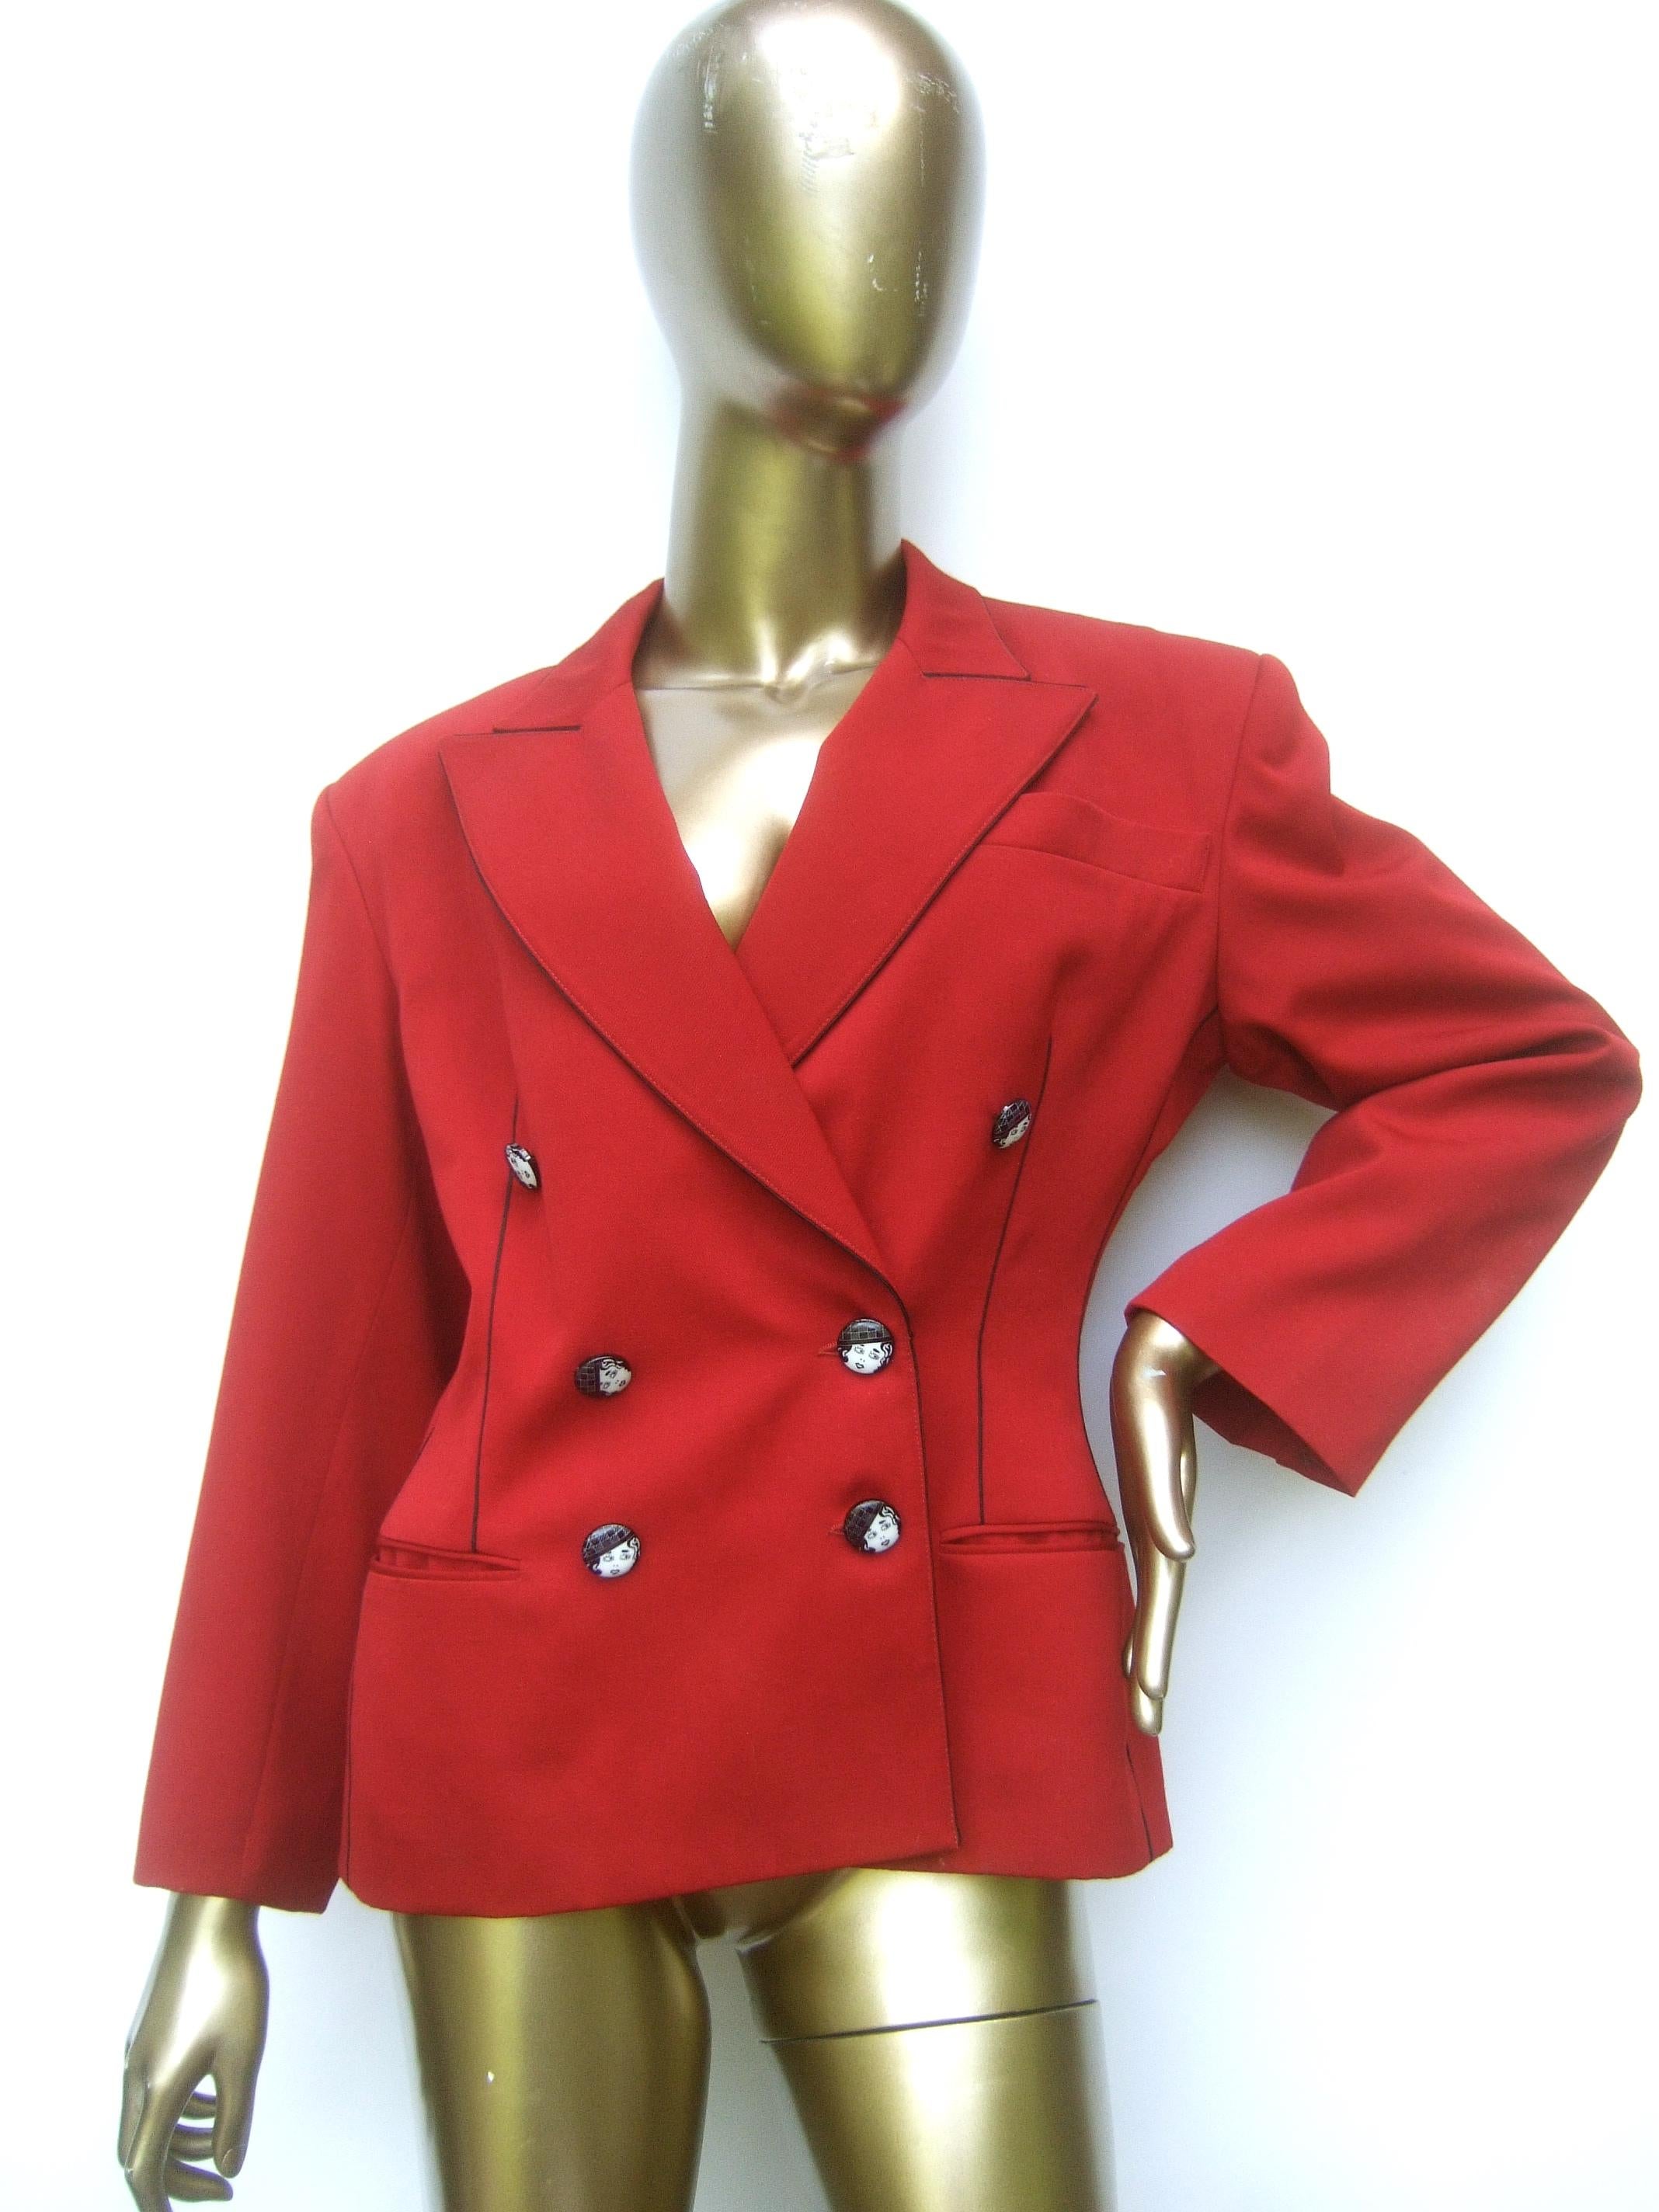 Lolita Lempicka Paris Red Wool Face Button Double-Breasted Blazer c 1980s In Good Condition For Sale In University City, MO